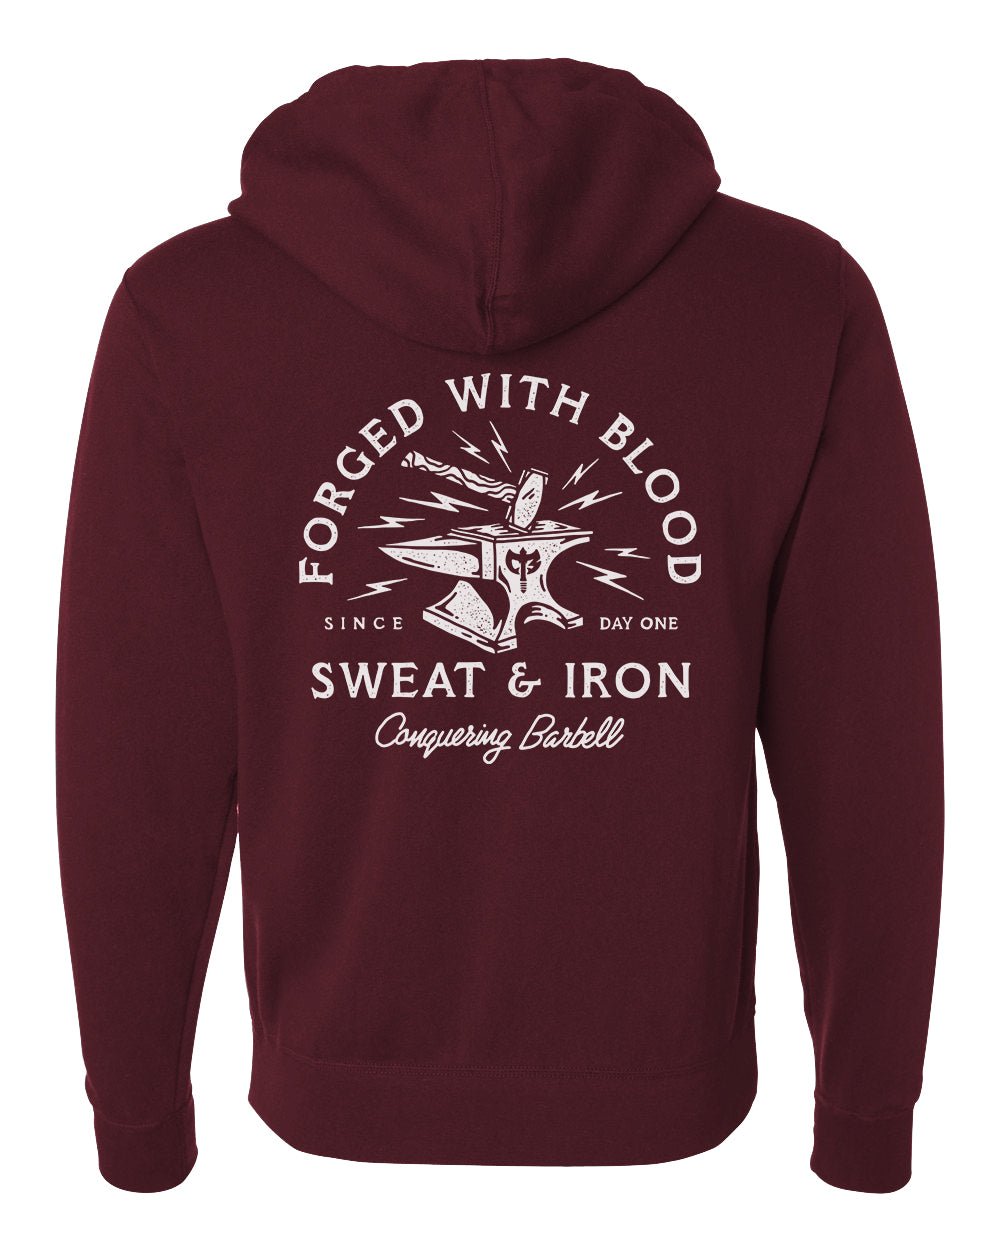 Forged with Blood, Sweat & Iron - on Burgandy Pullover Hoodie - Conquering Barbell